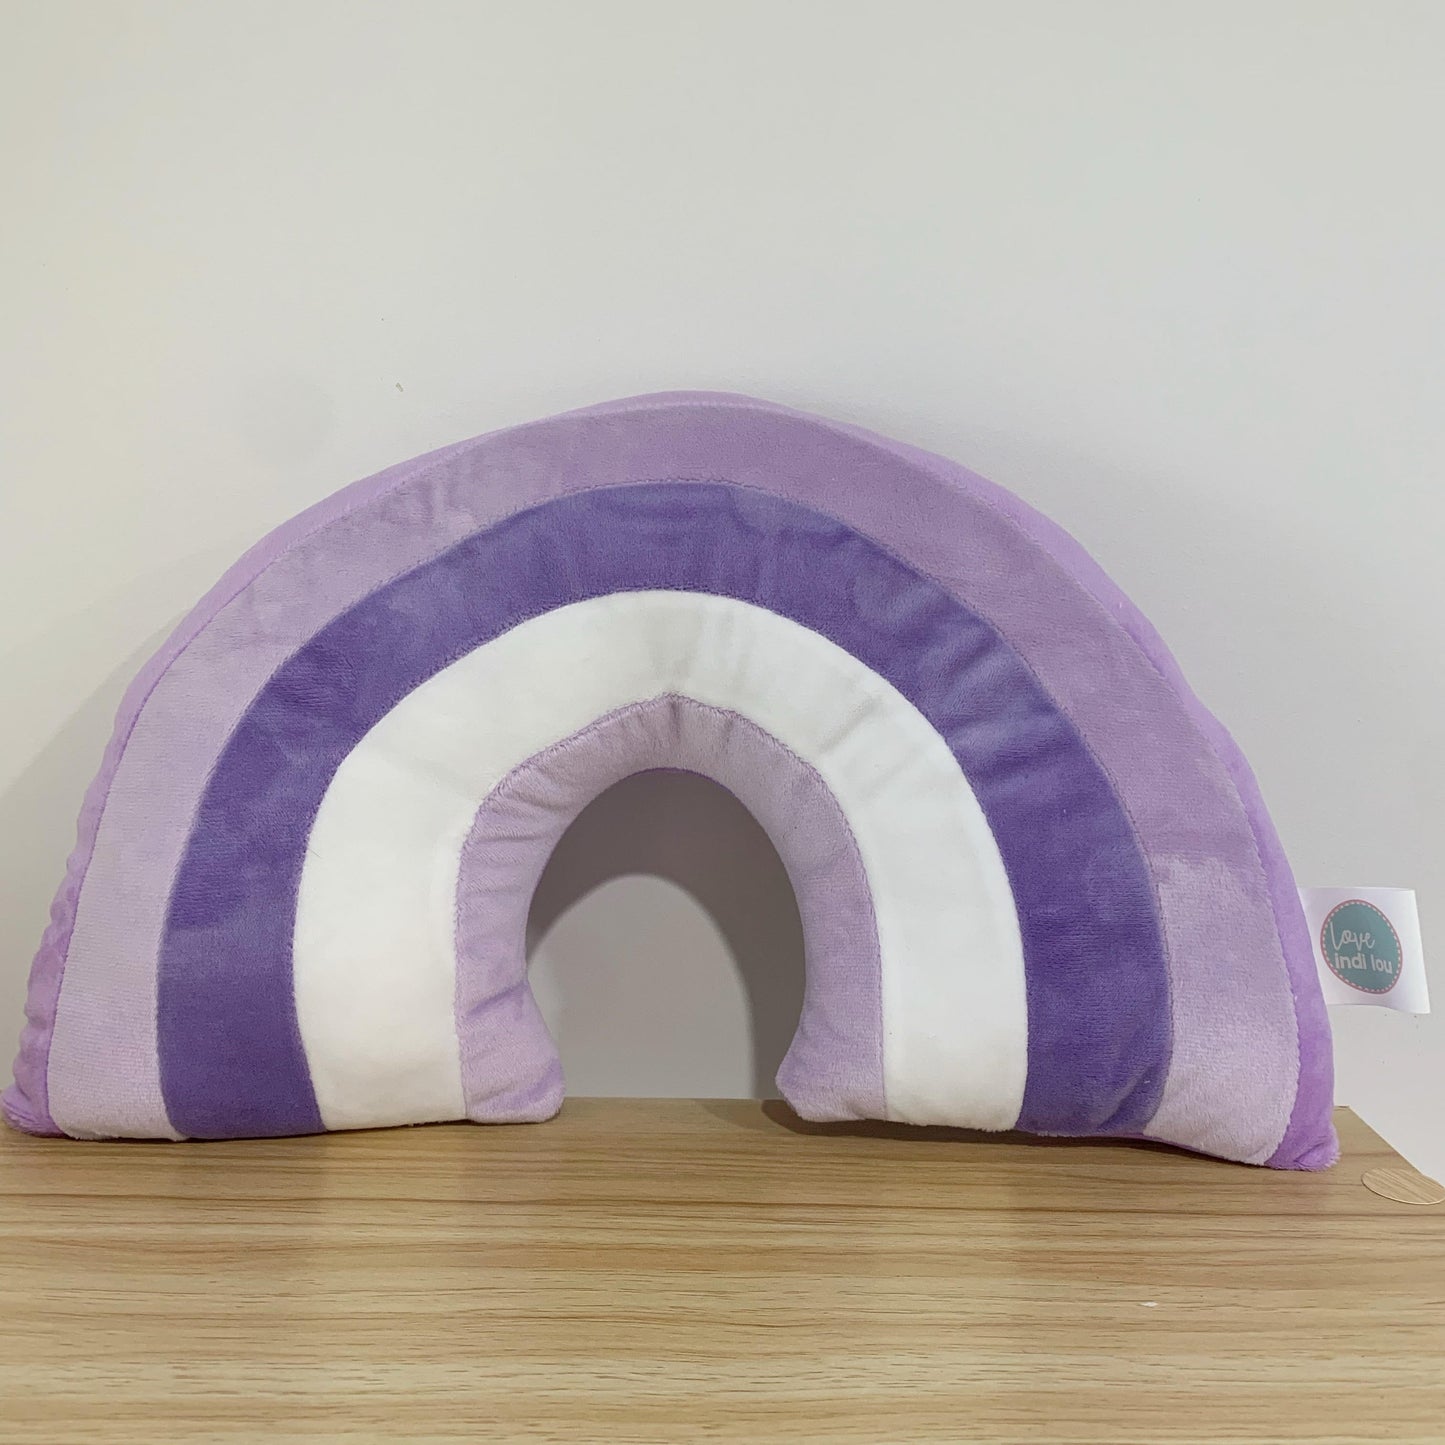 Rainbow Cushions - Buy 1 GET 1 HALF PRICE! With Personalisation